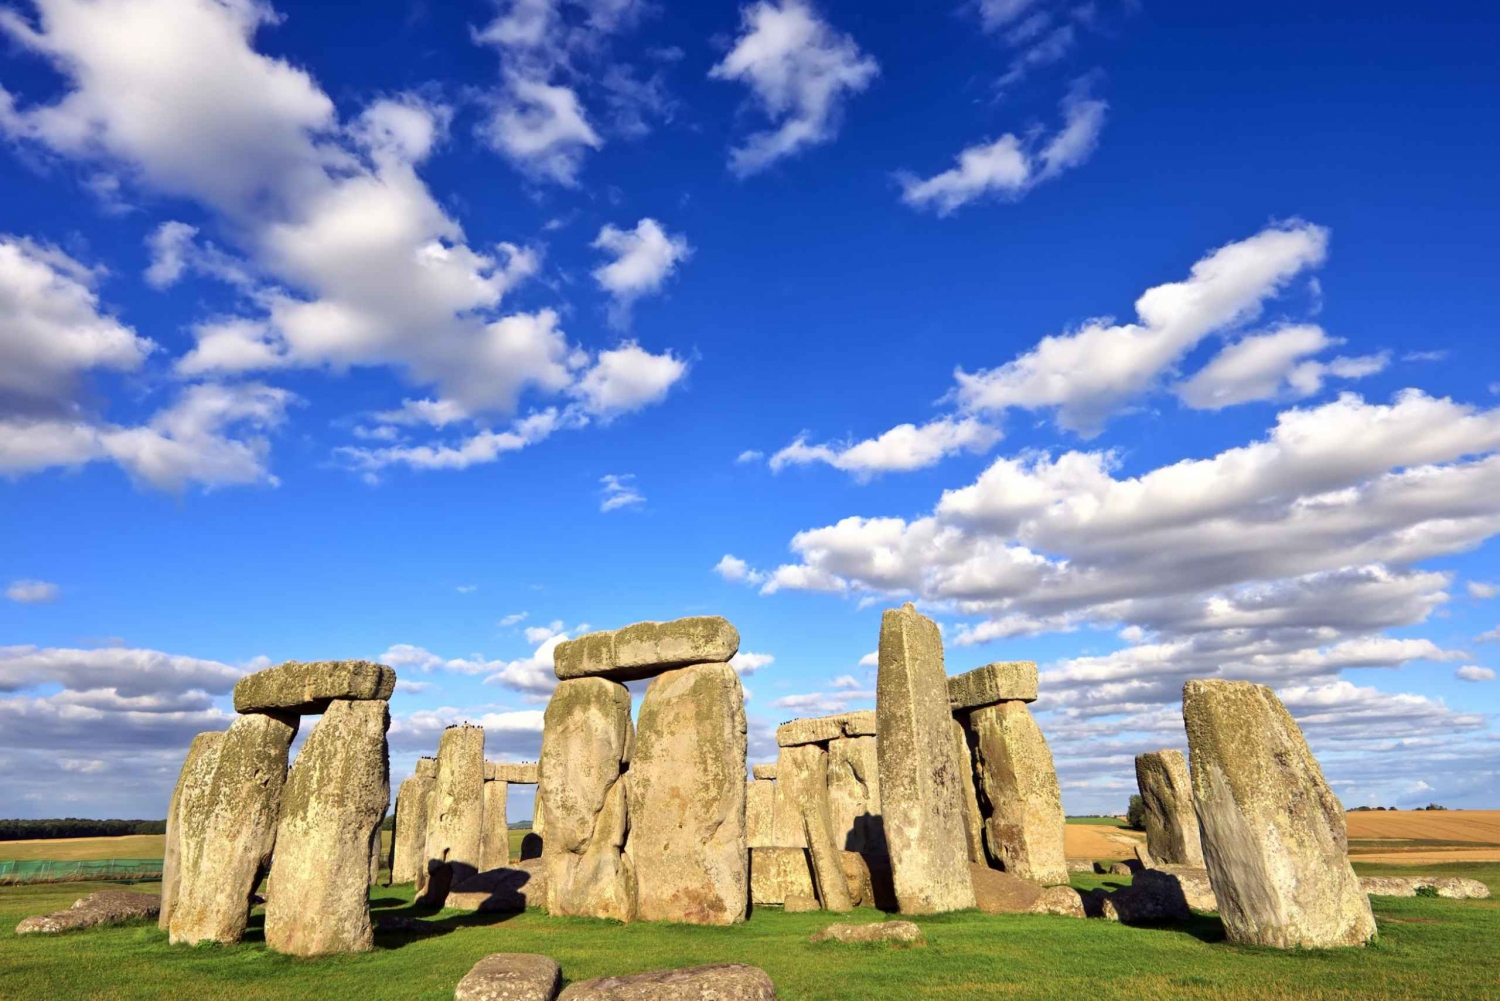 From London: Windsor, Oxford & Stonehenge Full-Day Trip